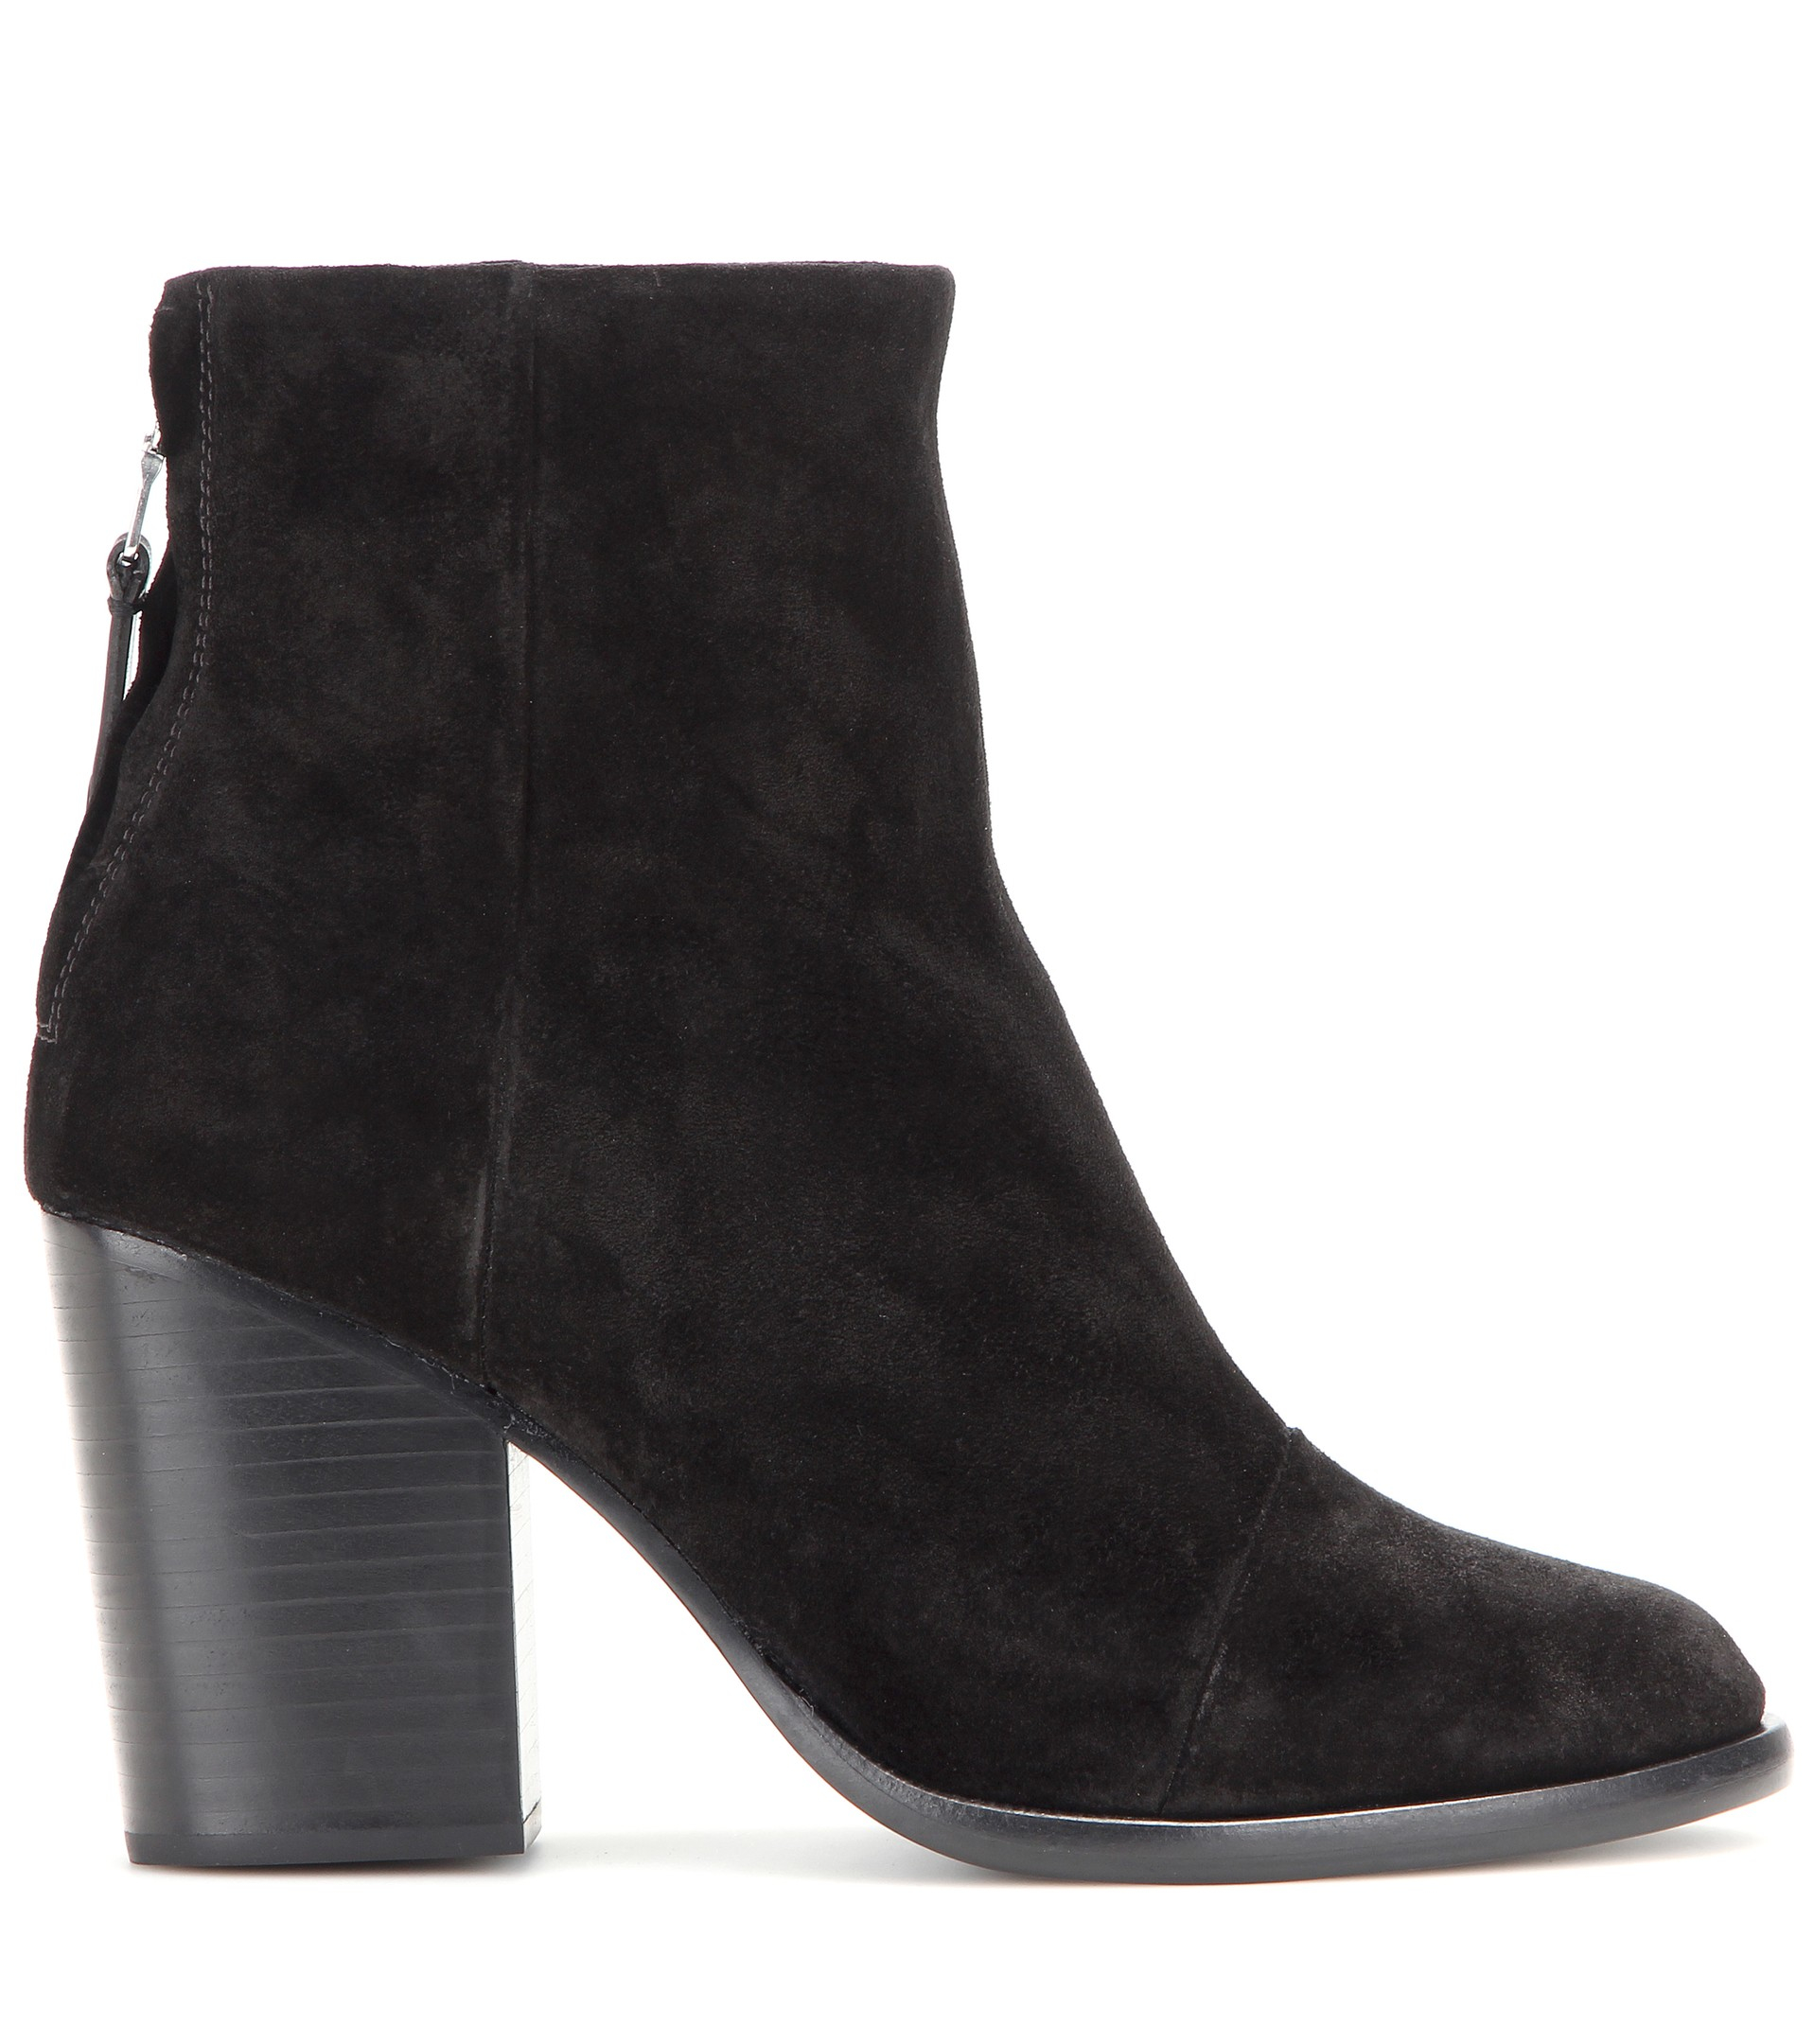 Lyst - Rag & bone Ashby Suede Ankle Boots in Black1917 x 2160